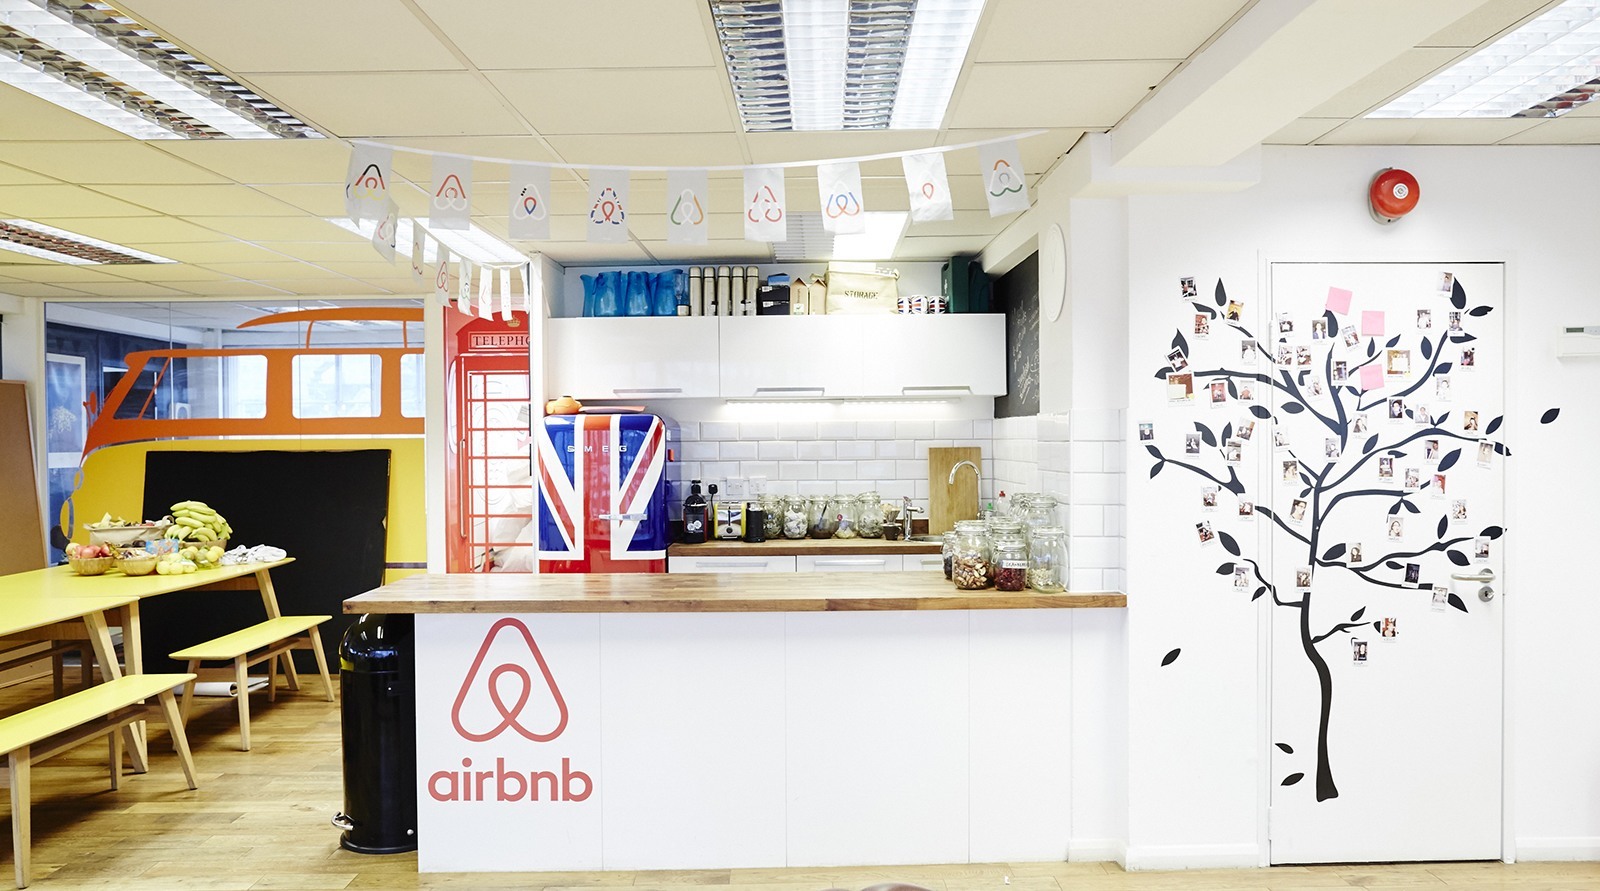 A Look Inside Airbnb’s New Offices in London - Officelovin'